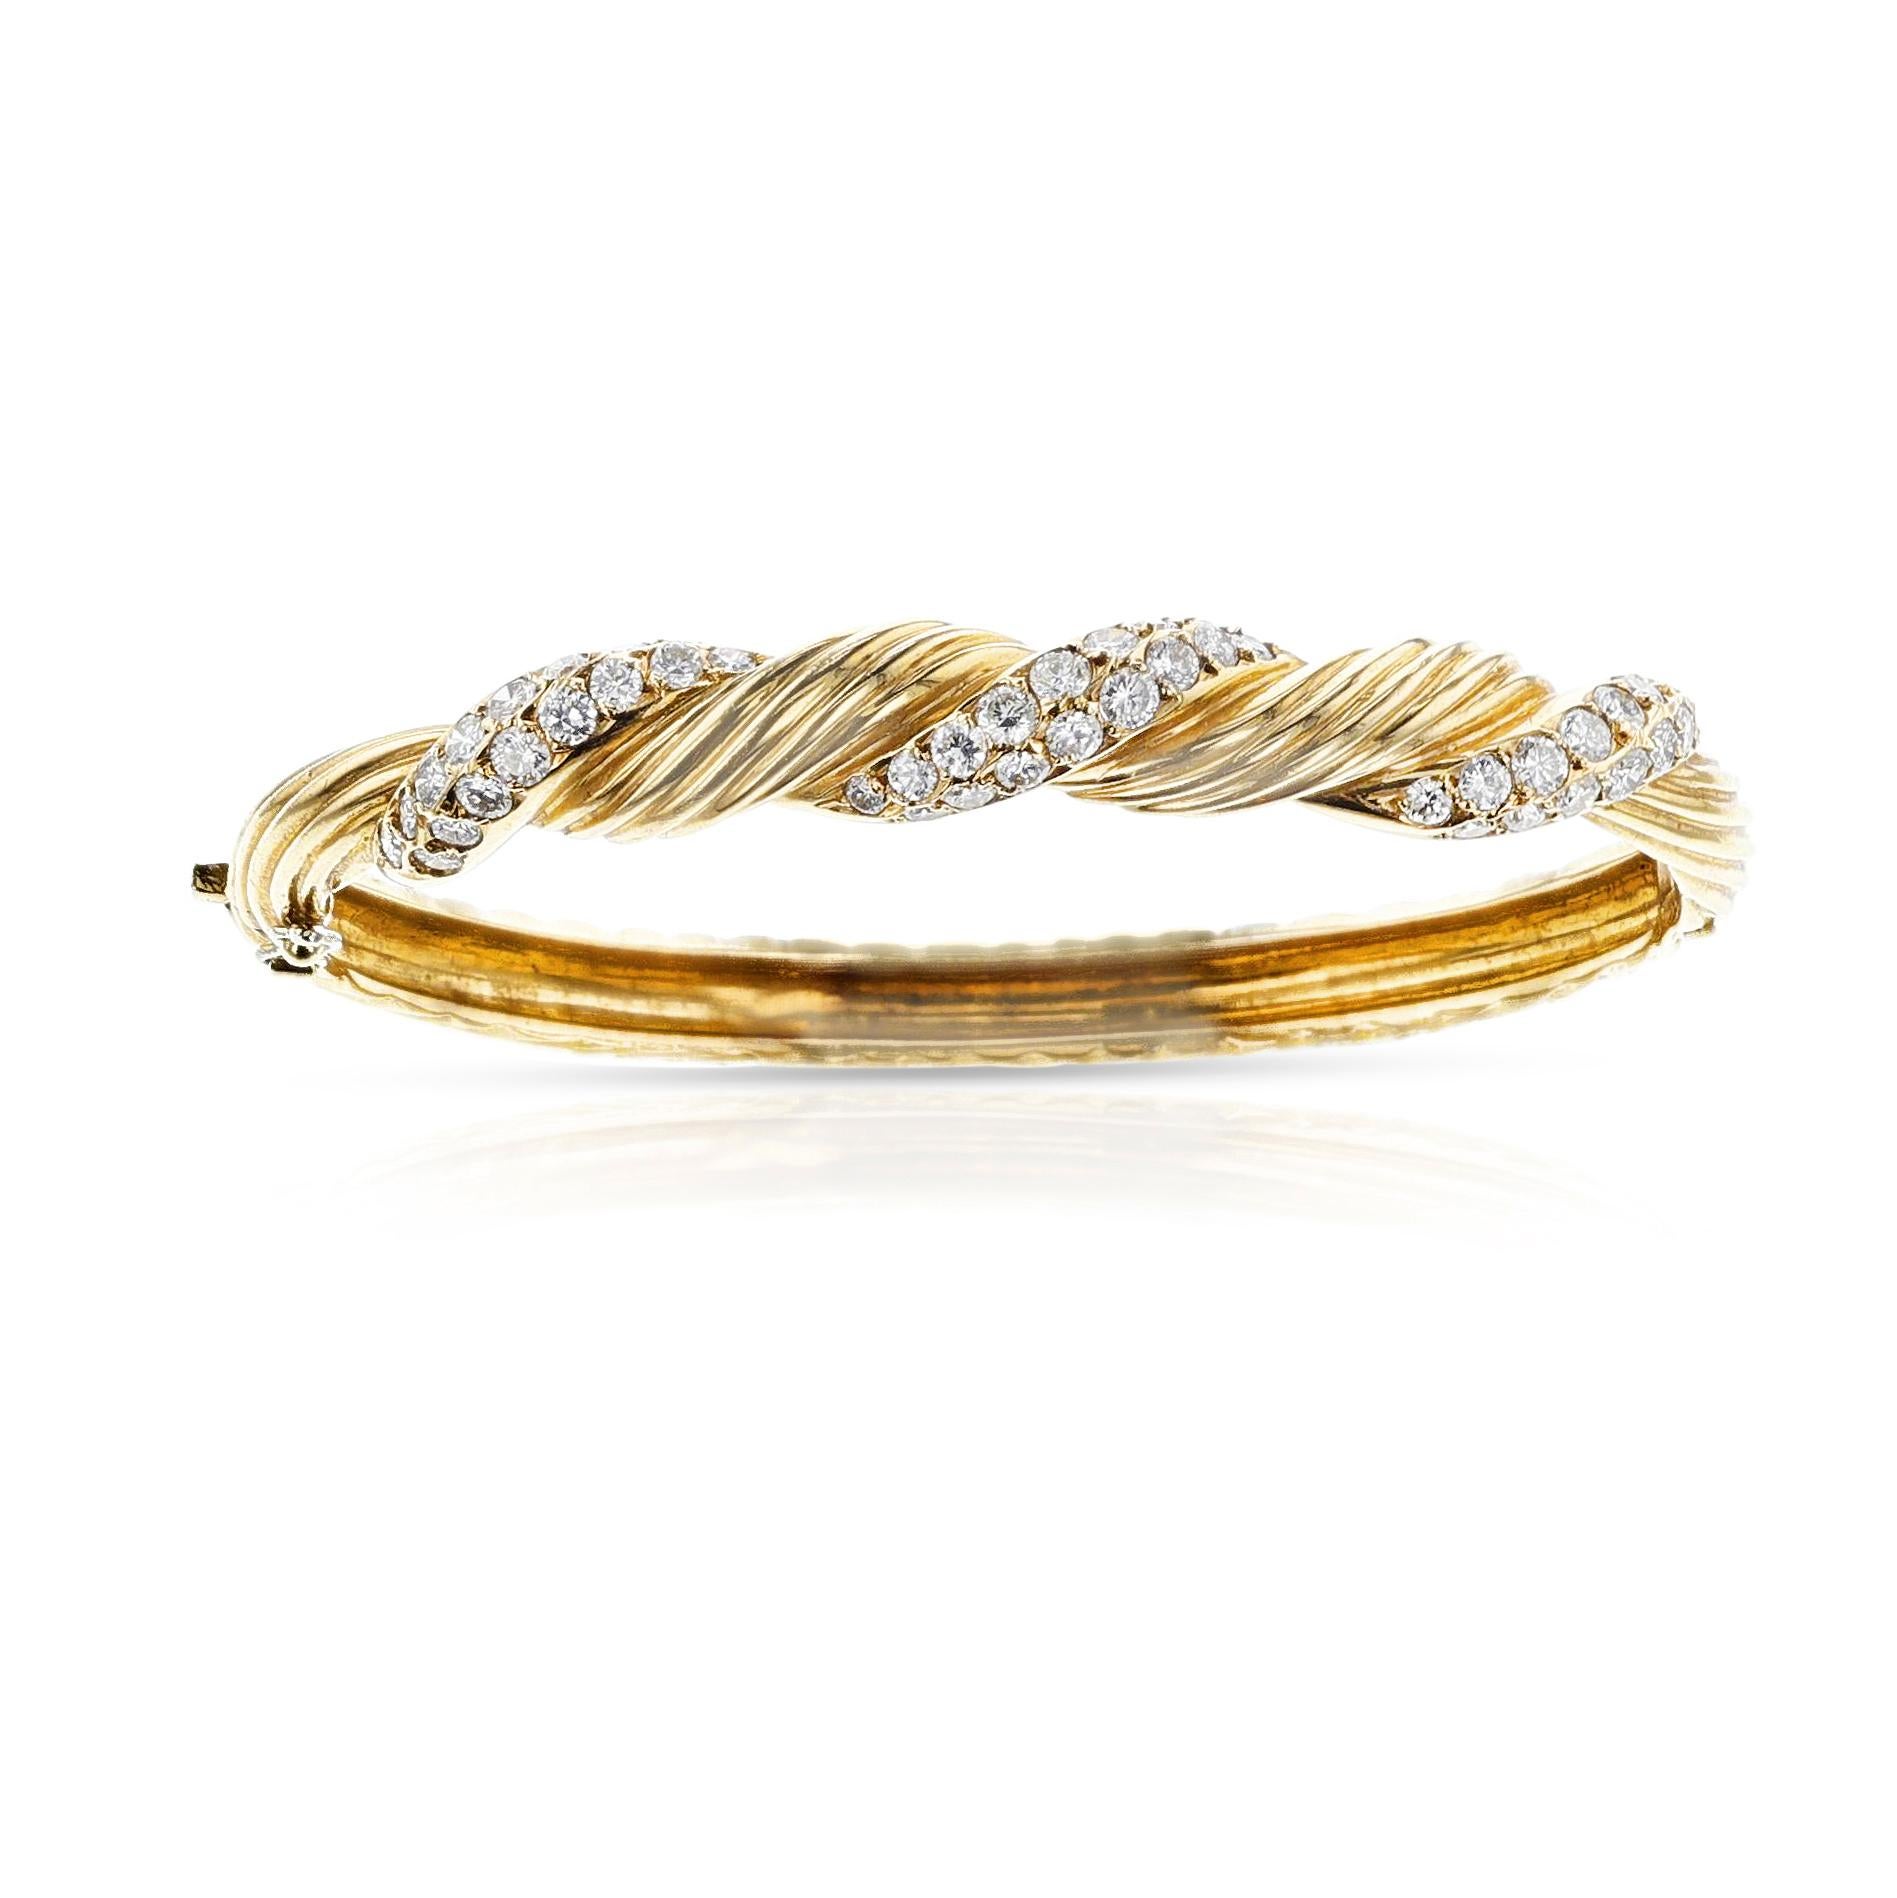 Van Cleef & Arpels Diamond and Gold Twisted Bangle, 18k For Sale 2